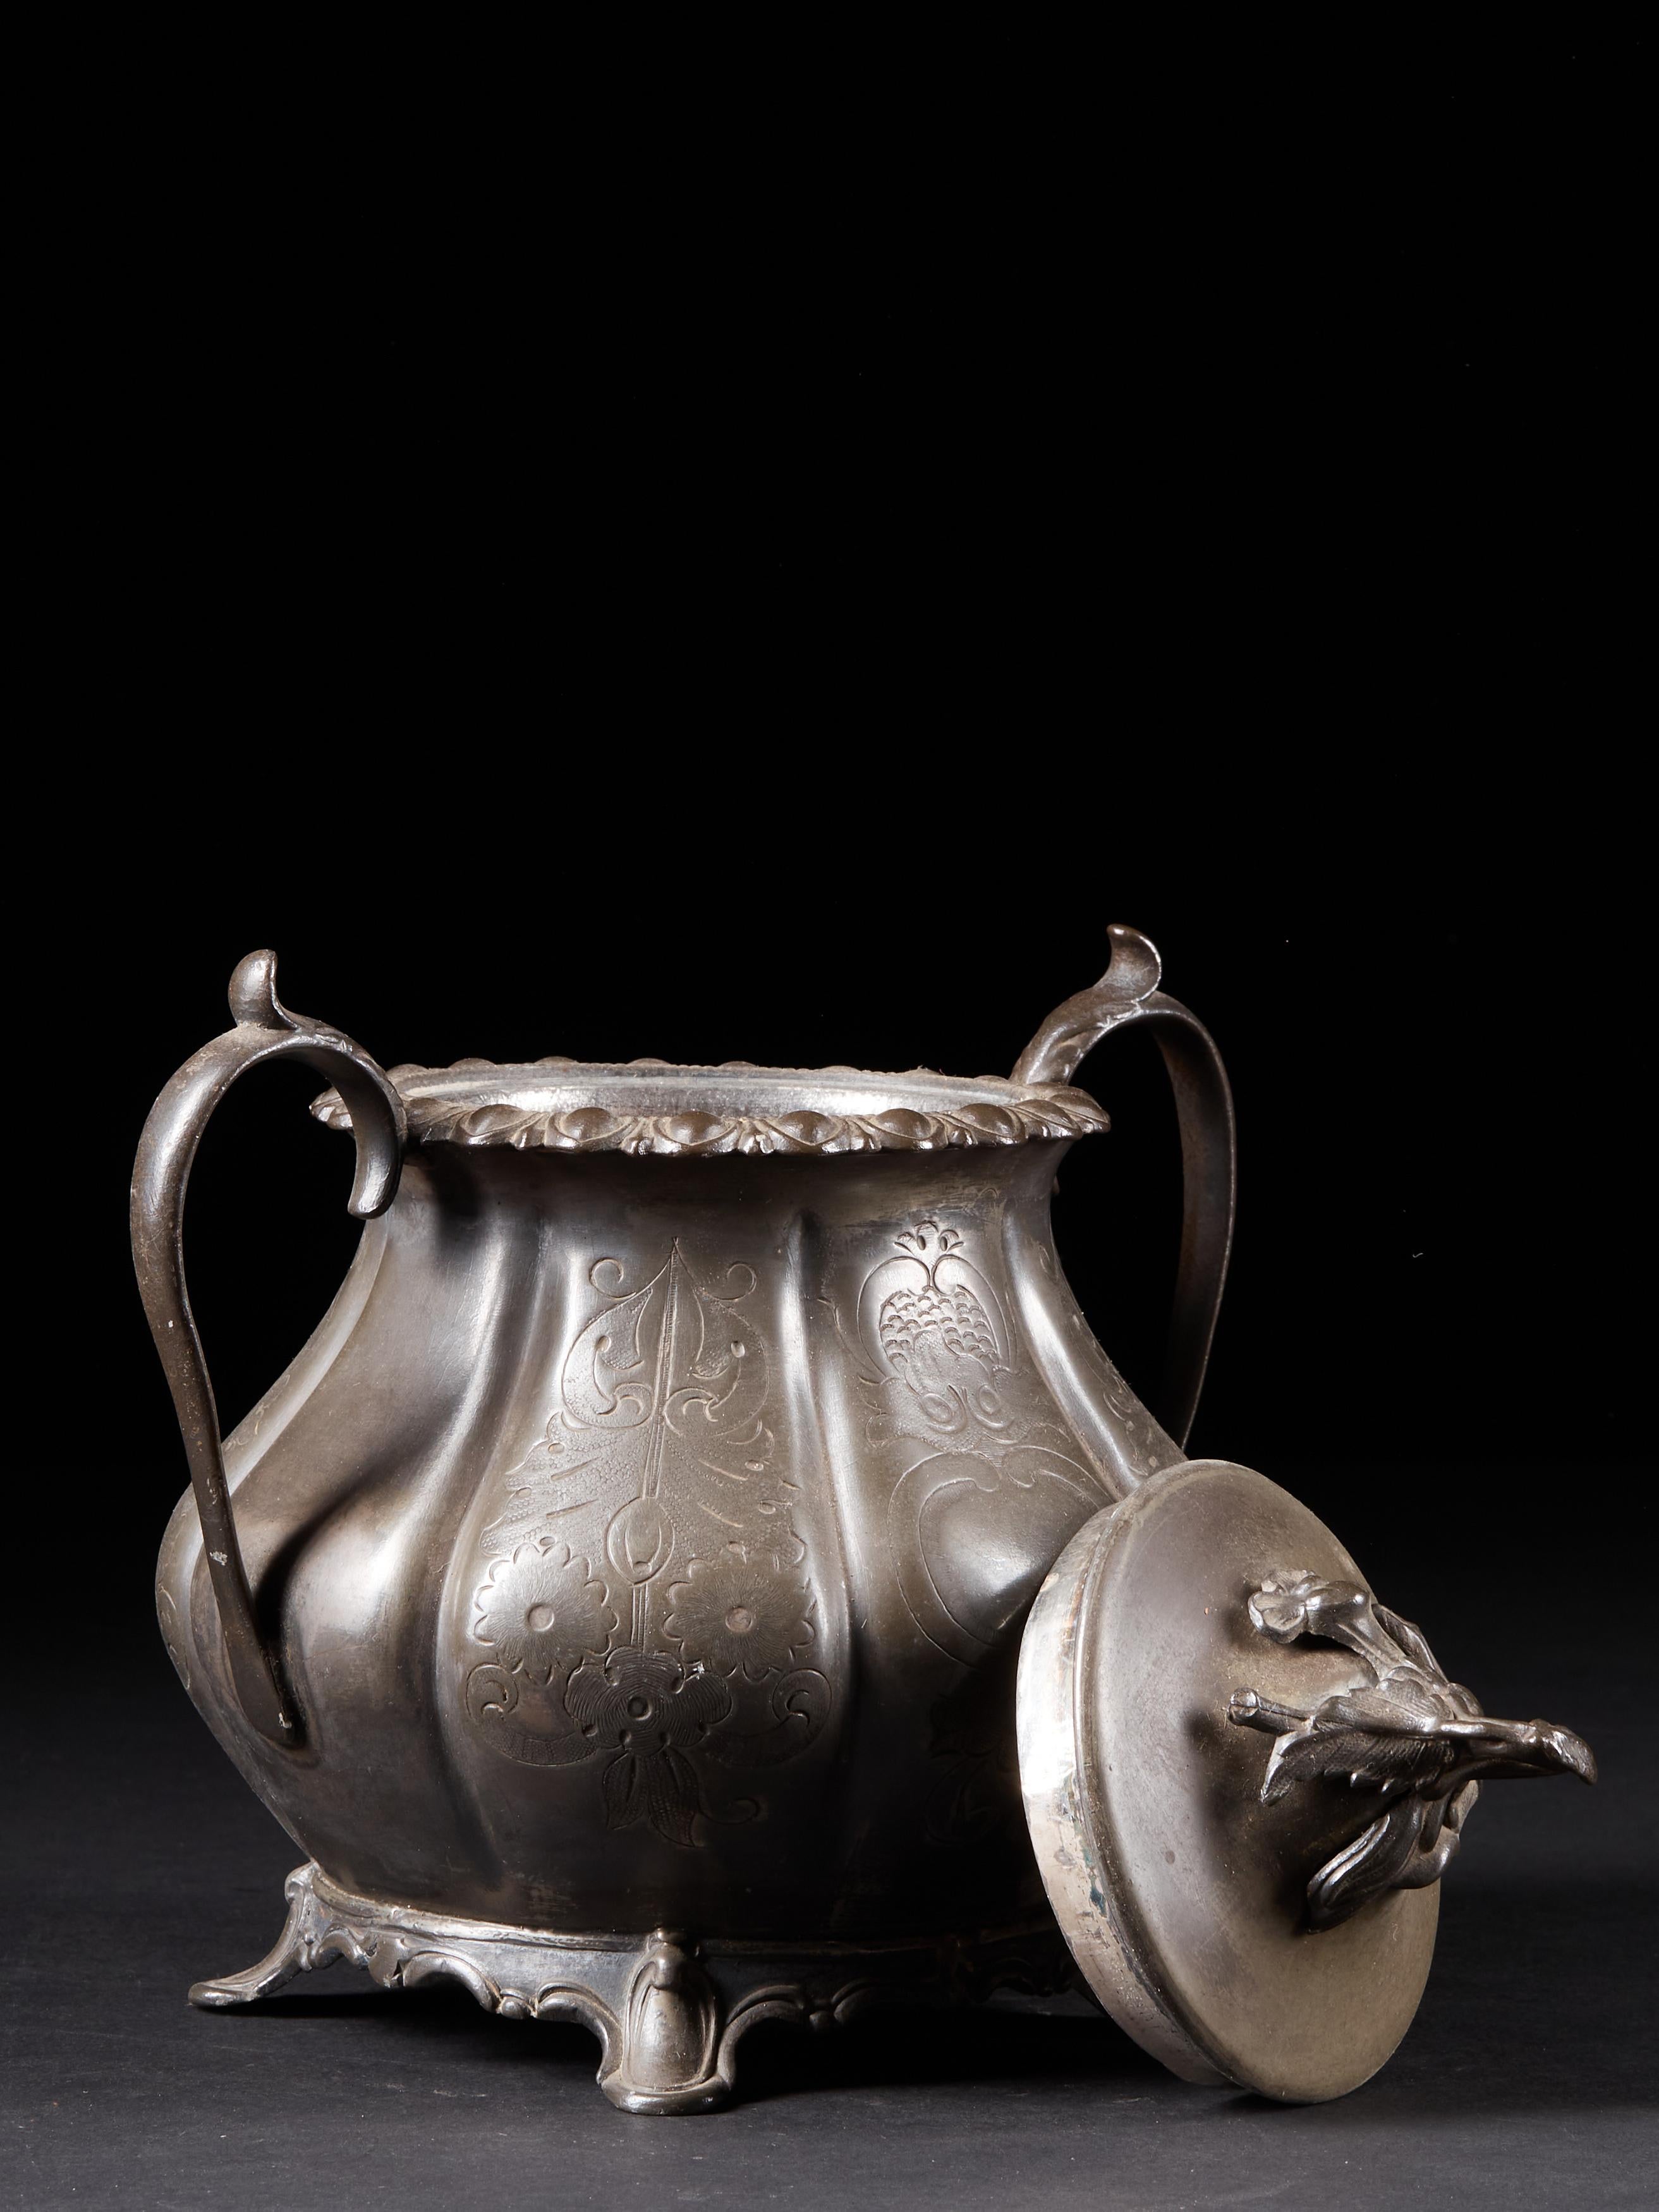 19th Century, Elegant Sugar or Cream Pot with an Embossed Floral Pattern 1